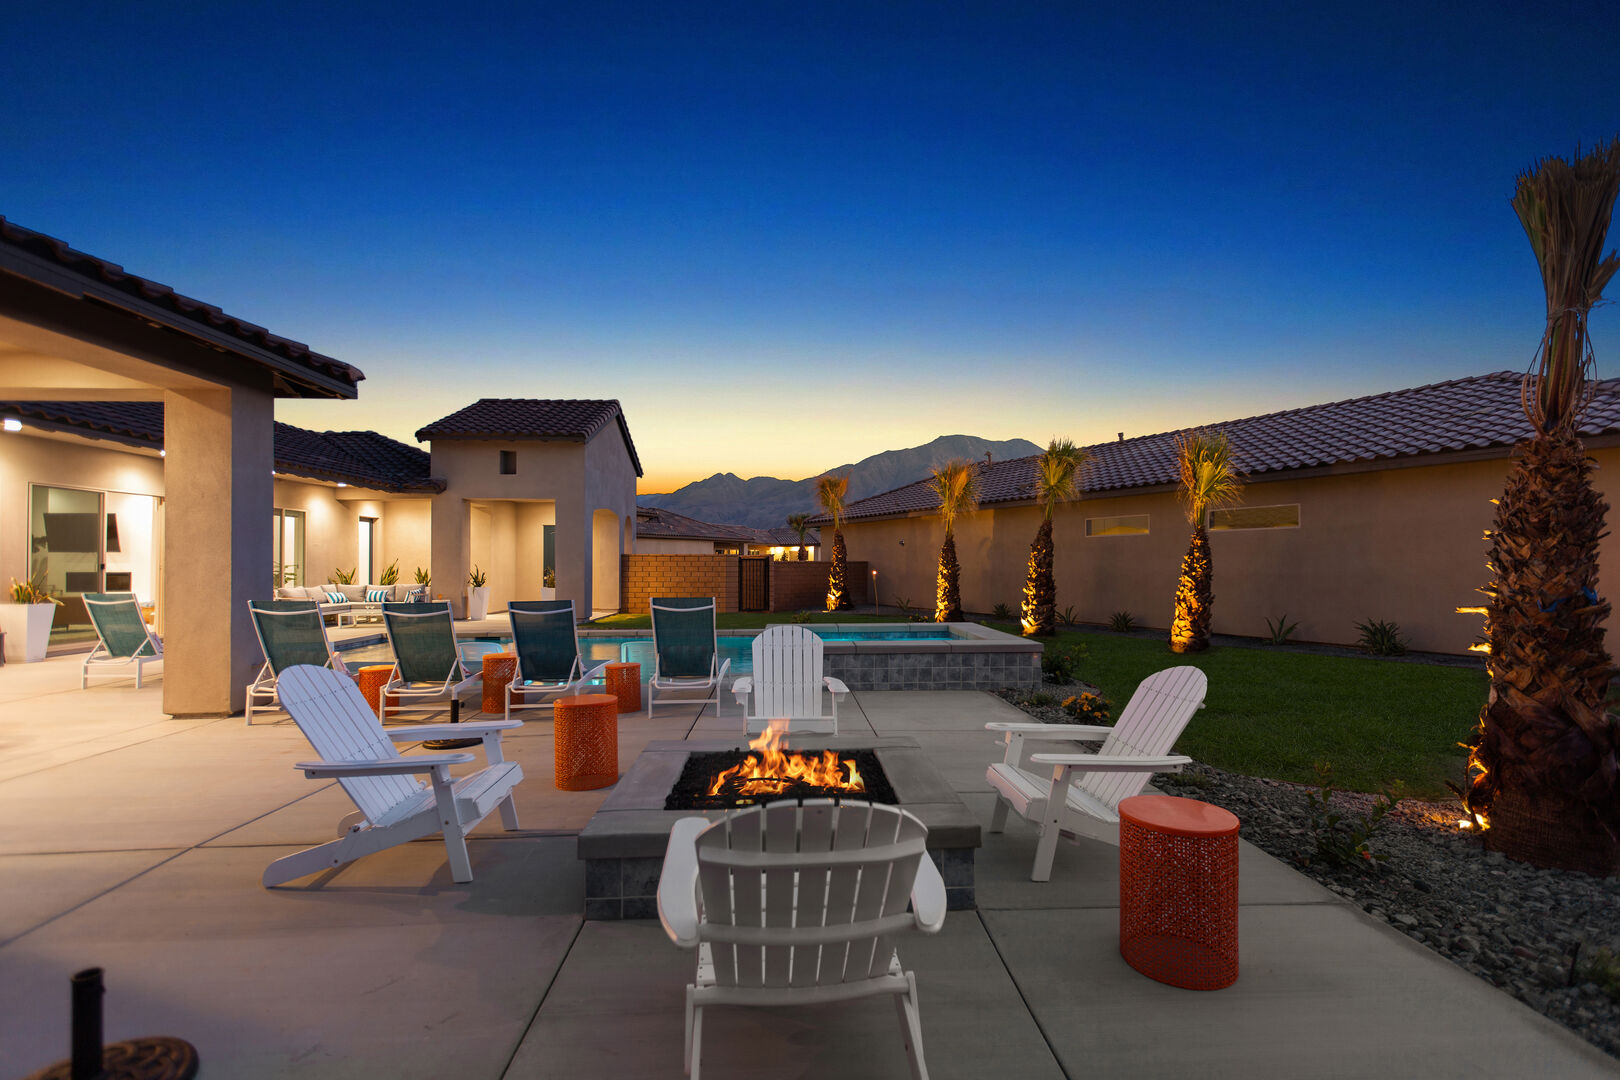 Gather around and tell your most memorable stories around the natural gas fire pit.